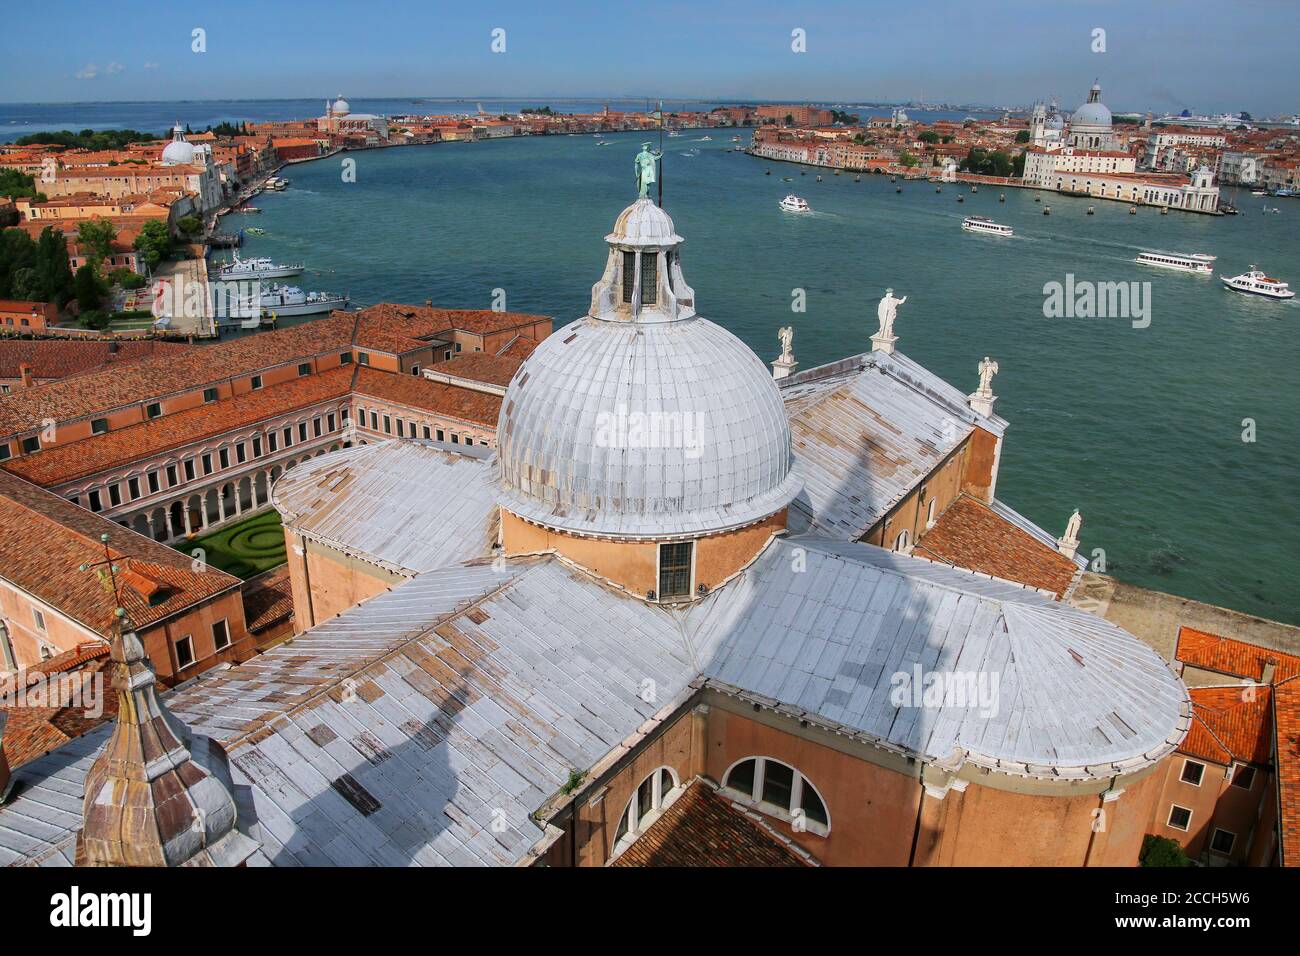 View of the dome of San Giorgio Maggiore church and Giudecca Canal in Venice, Italy. Venice is situated across a group of 117 small islands that are s Stock Photo